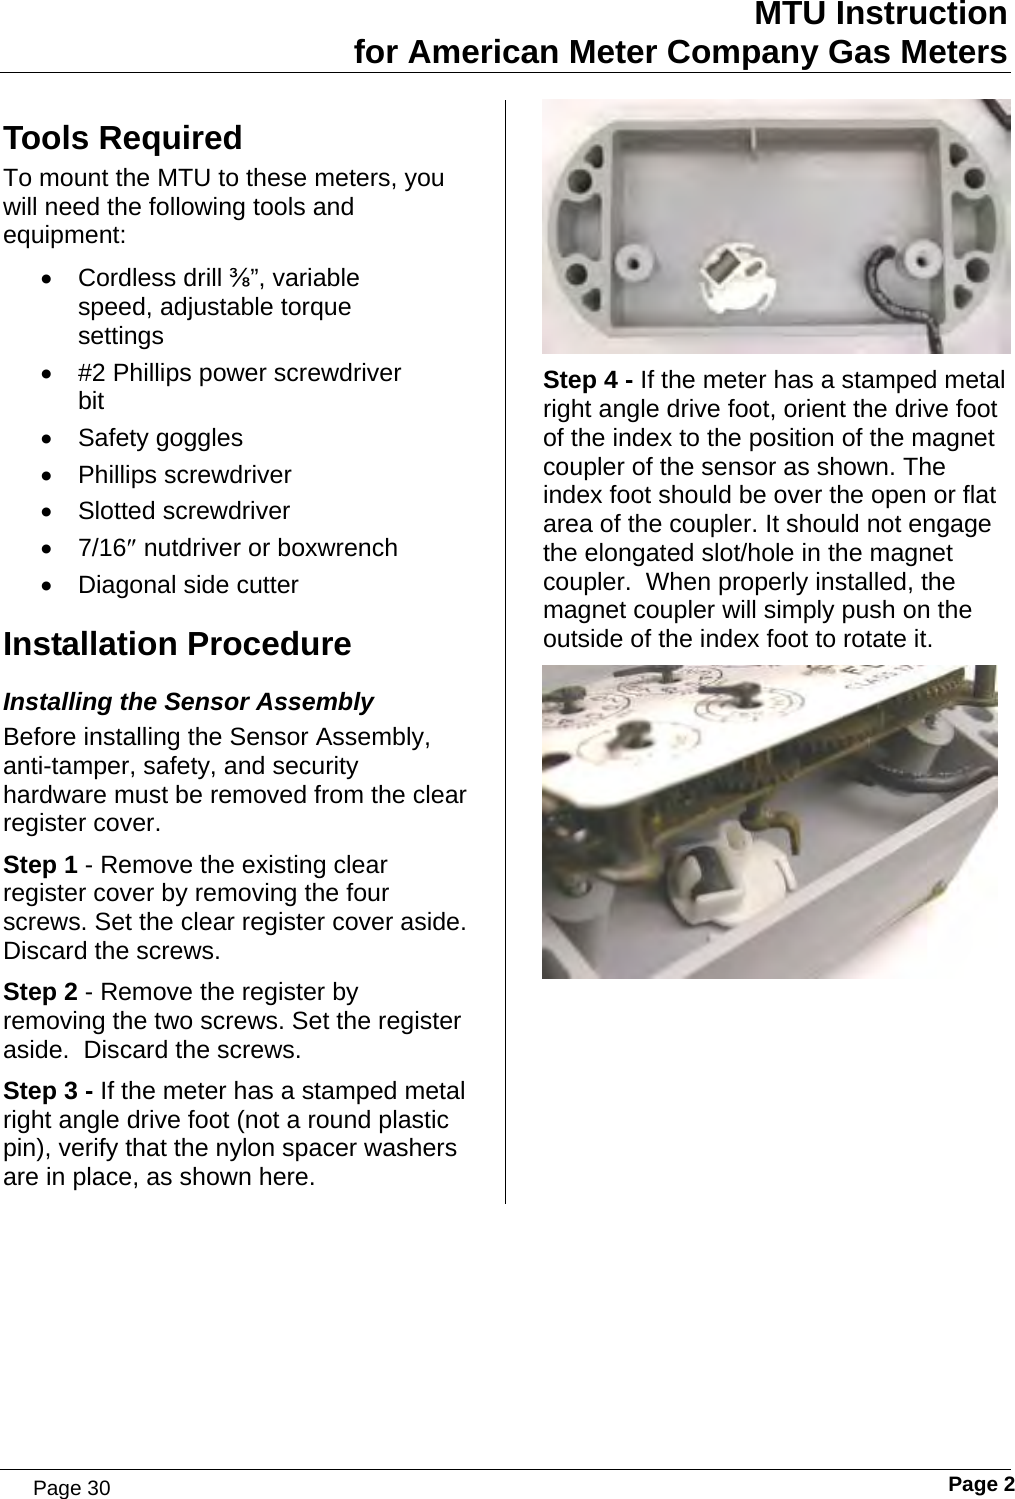 Page 30 of Aclara Technologies 09015 Transmitter for Meter Reading User Manual users manual